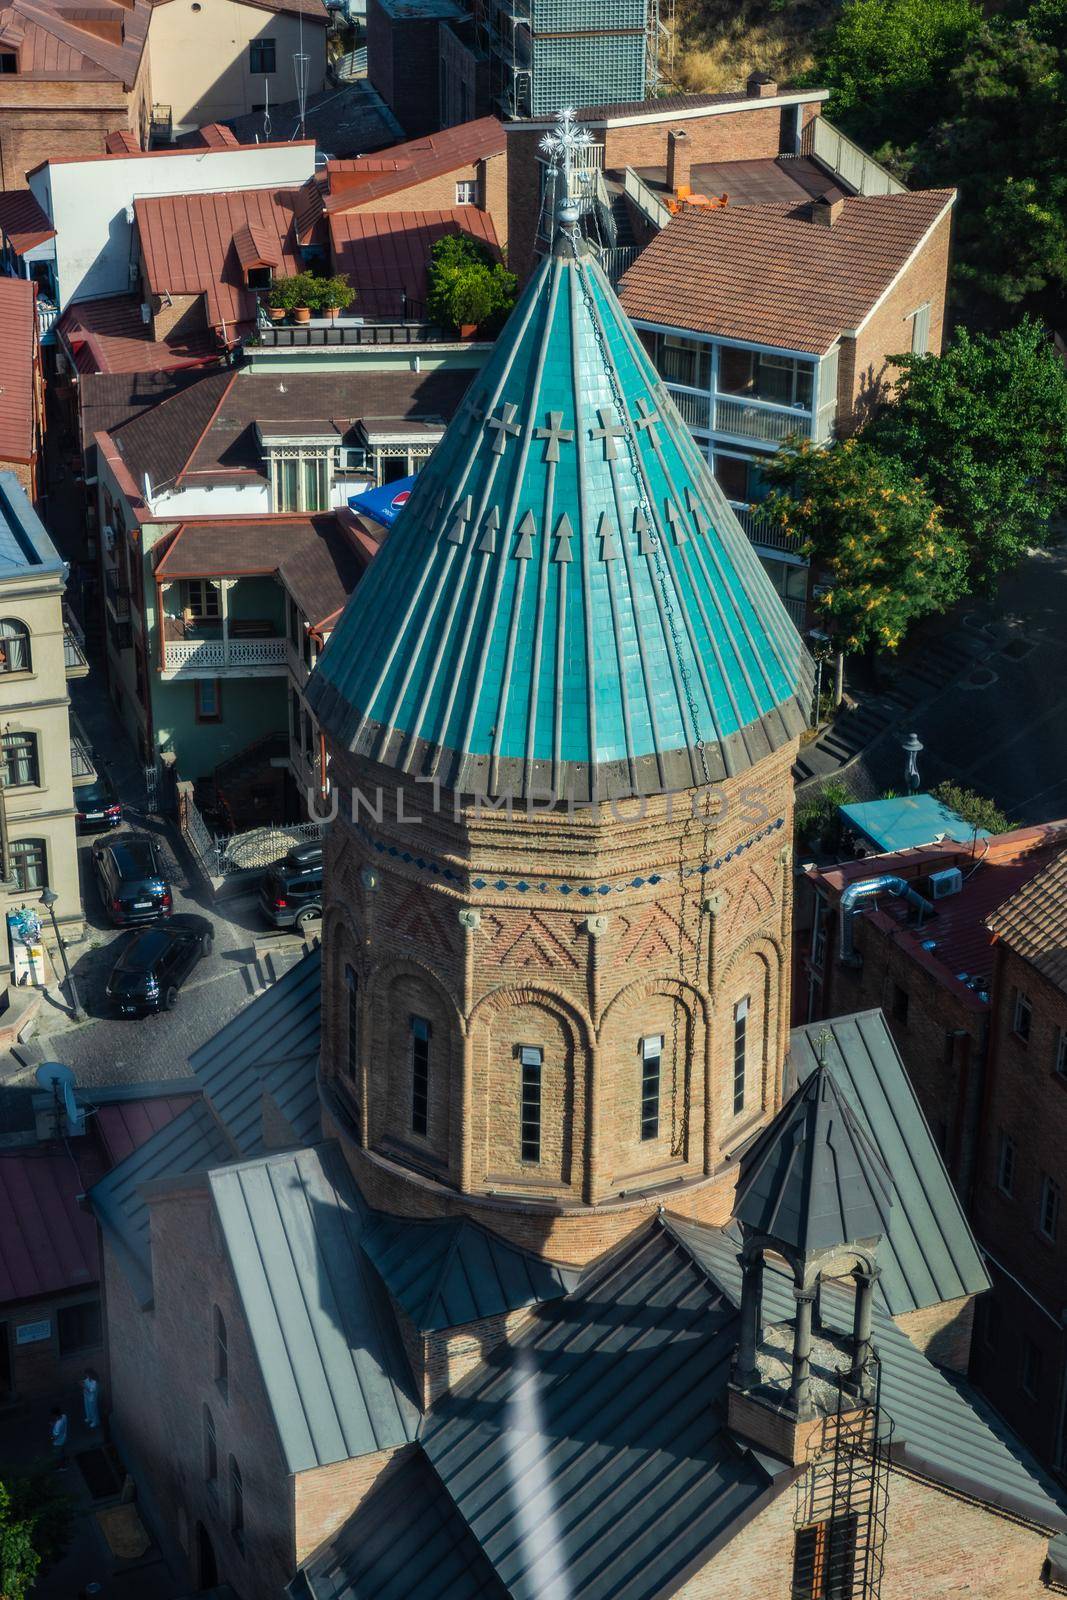 Surb Gevork cathedral in Old town of Tbilisi, capital city of Georgia